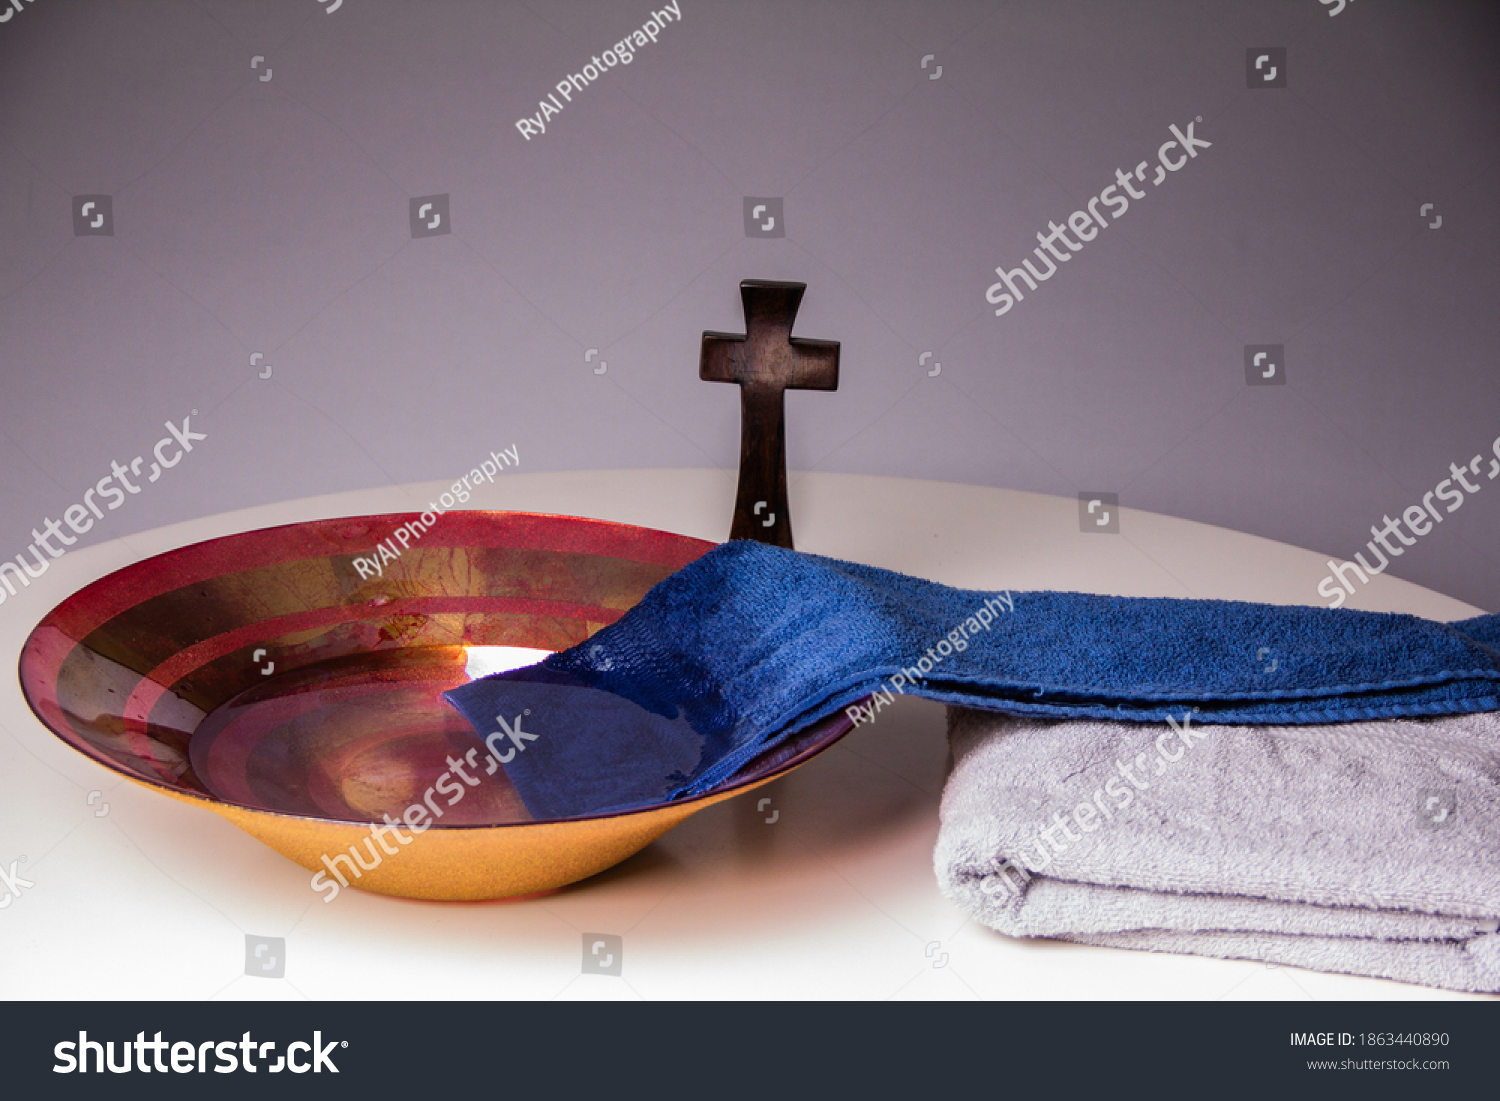 Towel in bowl of water on Maundy Thursday #1863440890